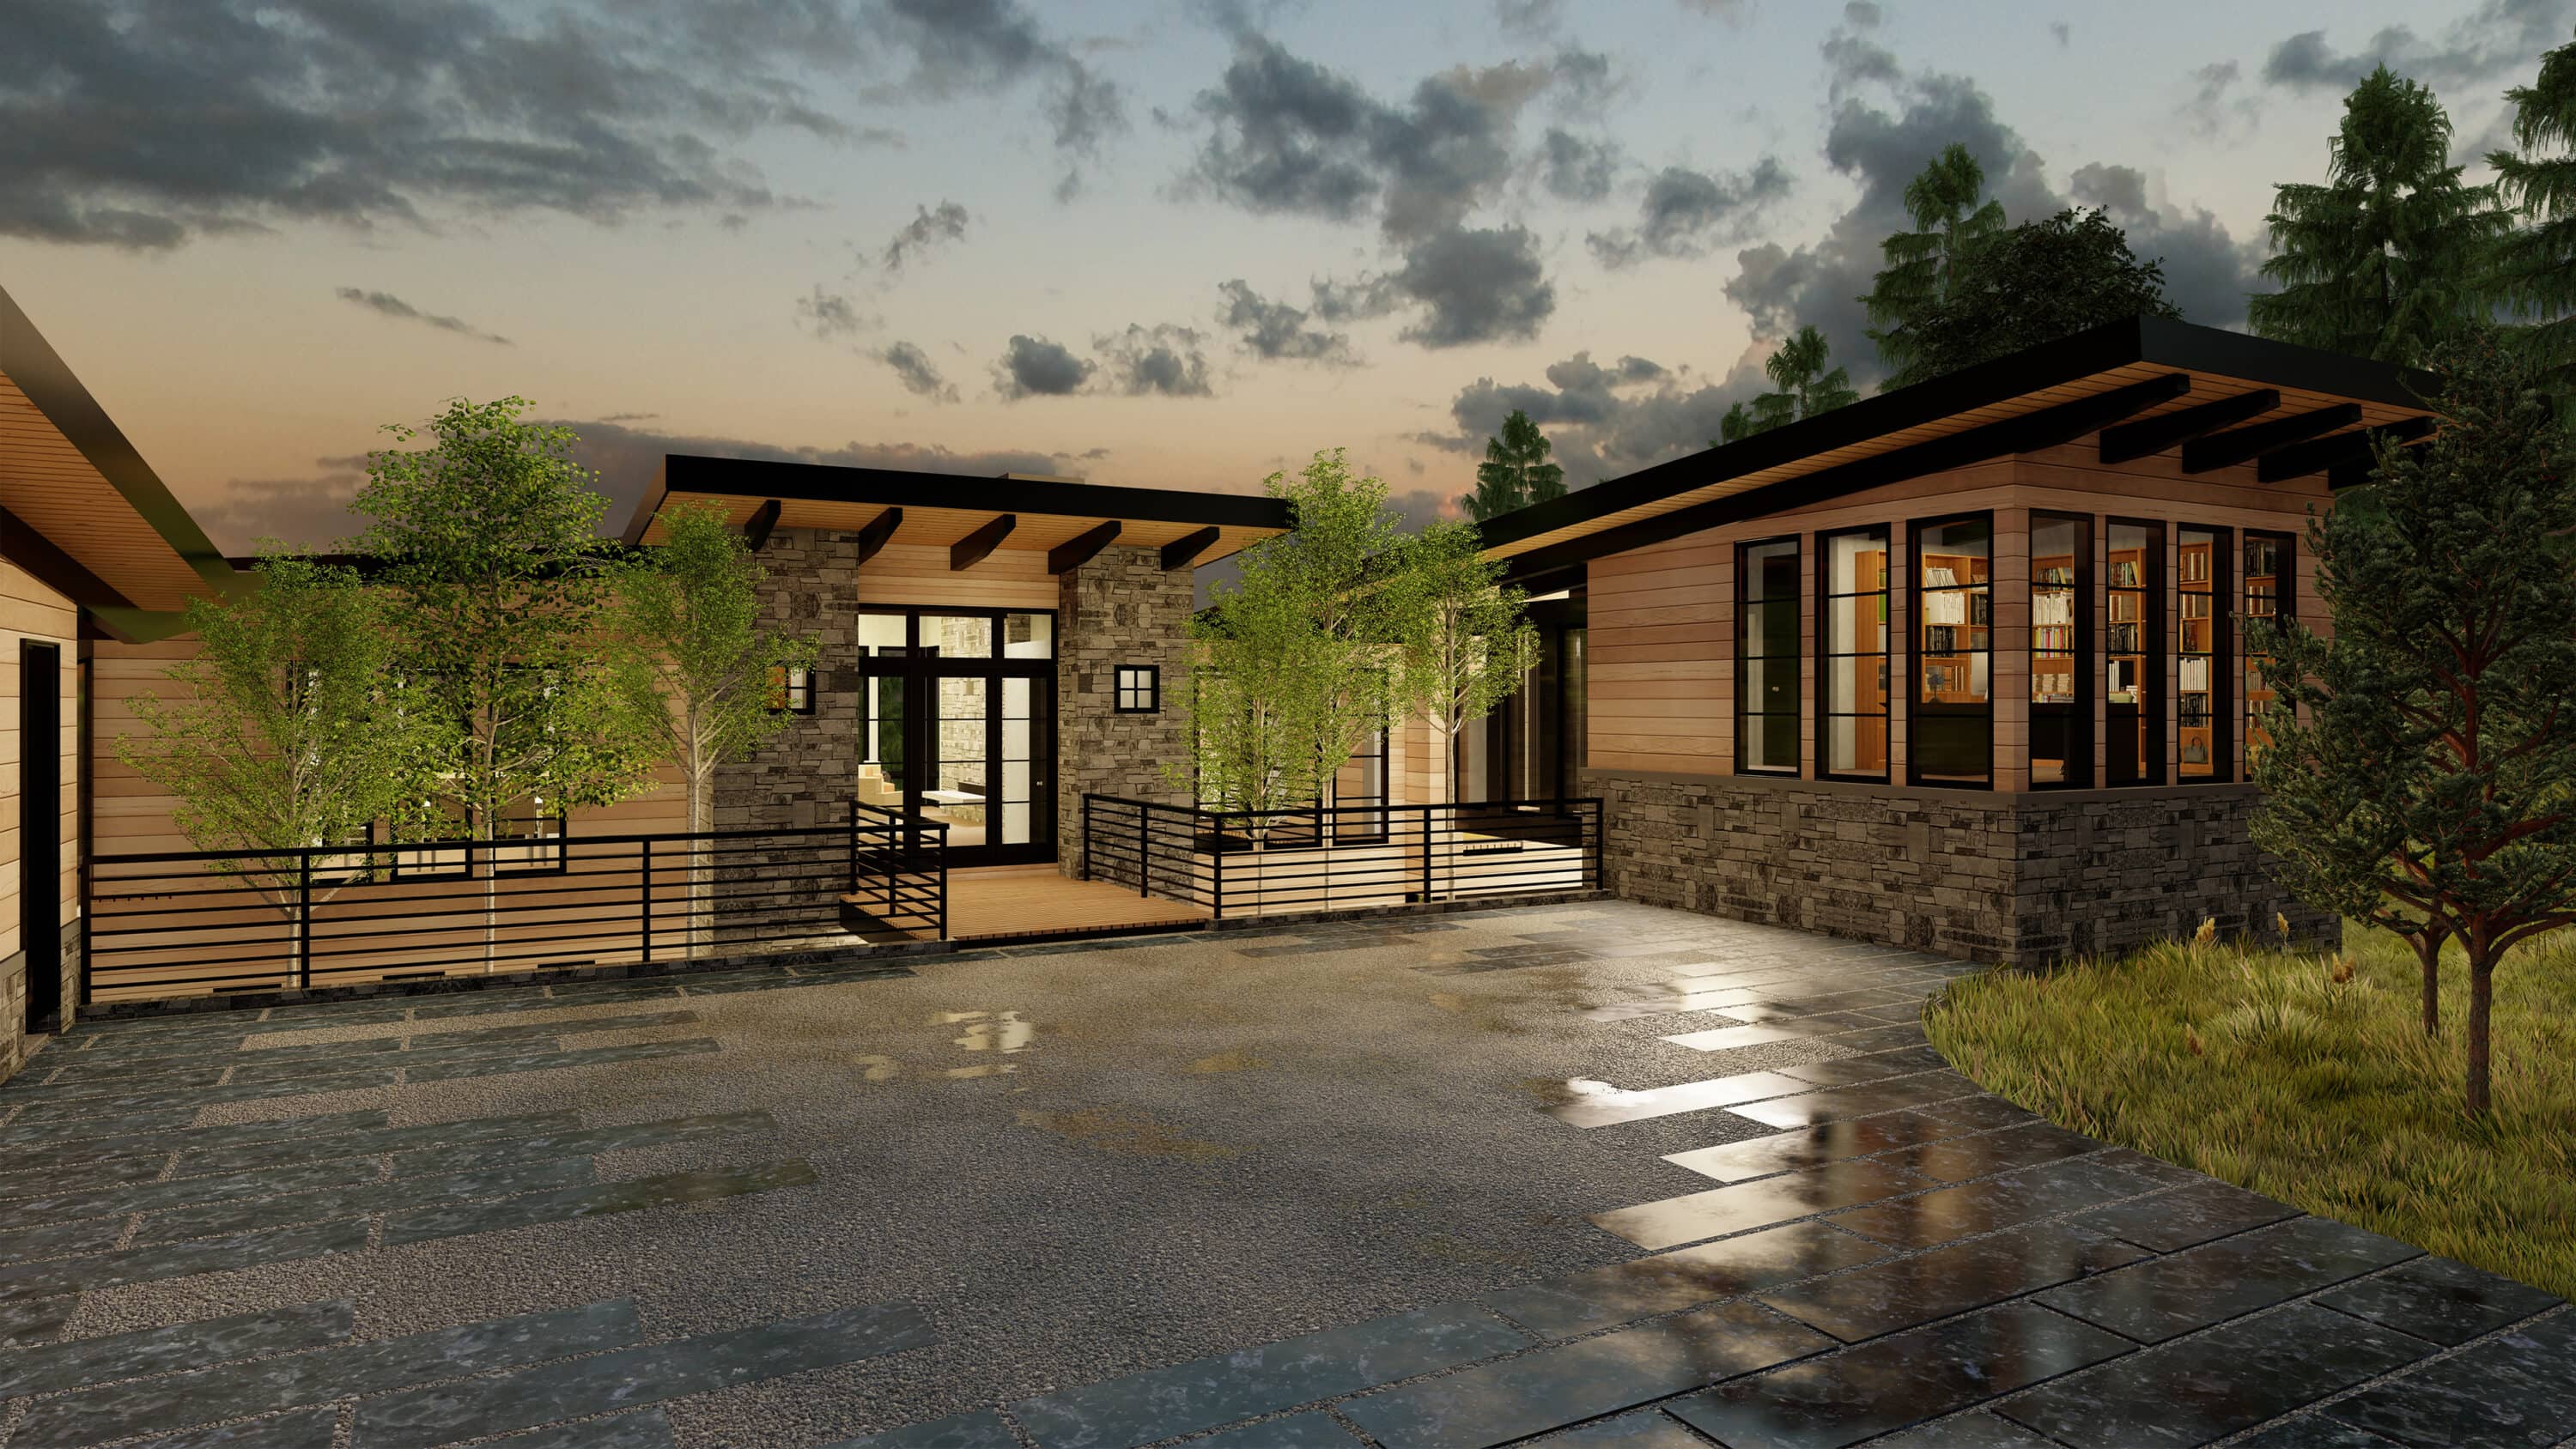 Streetside Rendering of Big Sky MT Spanish Peaks Residence, contemporary design with clean hard lines, light woods ands natural stone.